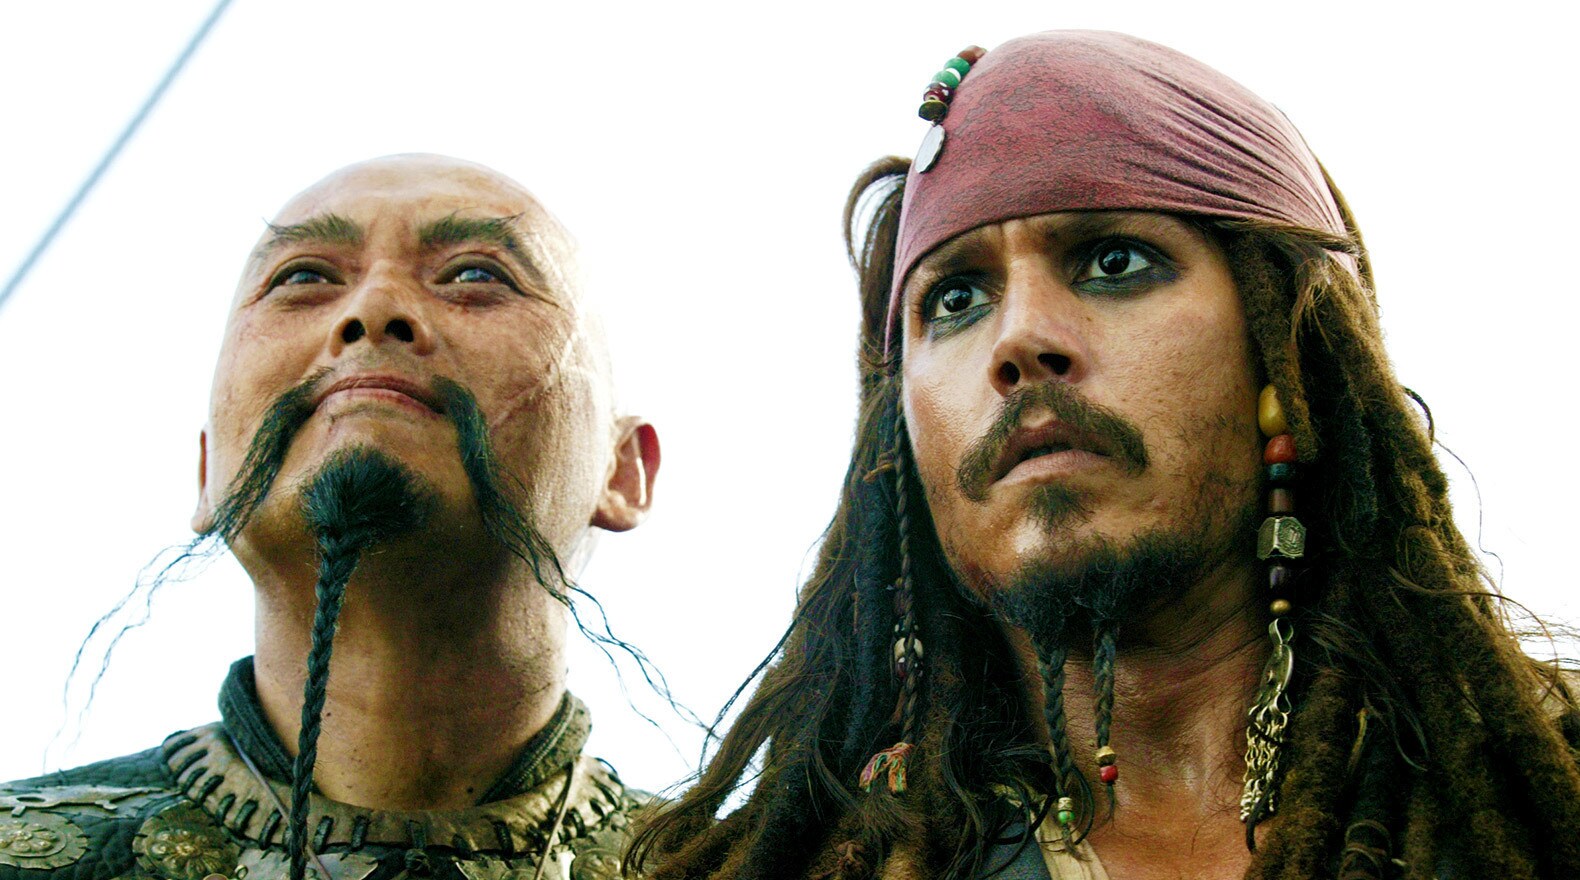 Jack Sparrow Gallery | Pirates of the Caribbean